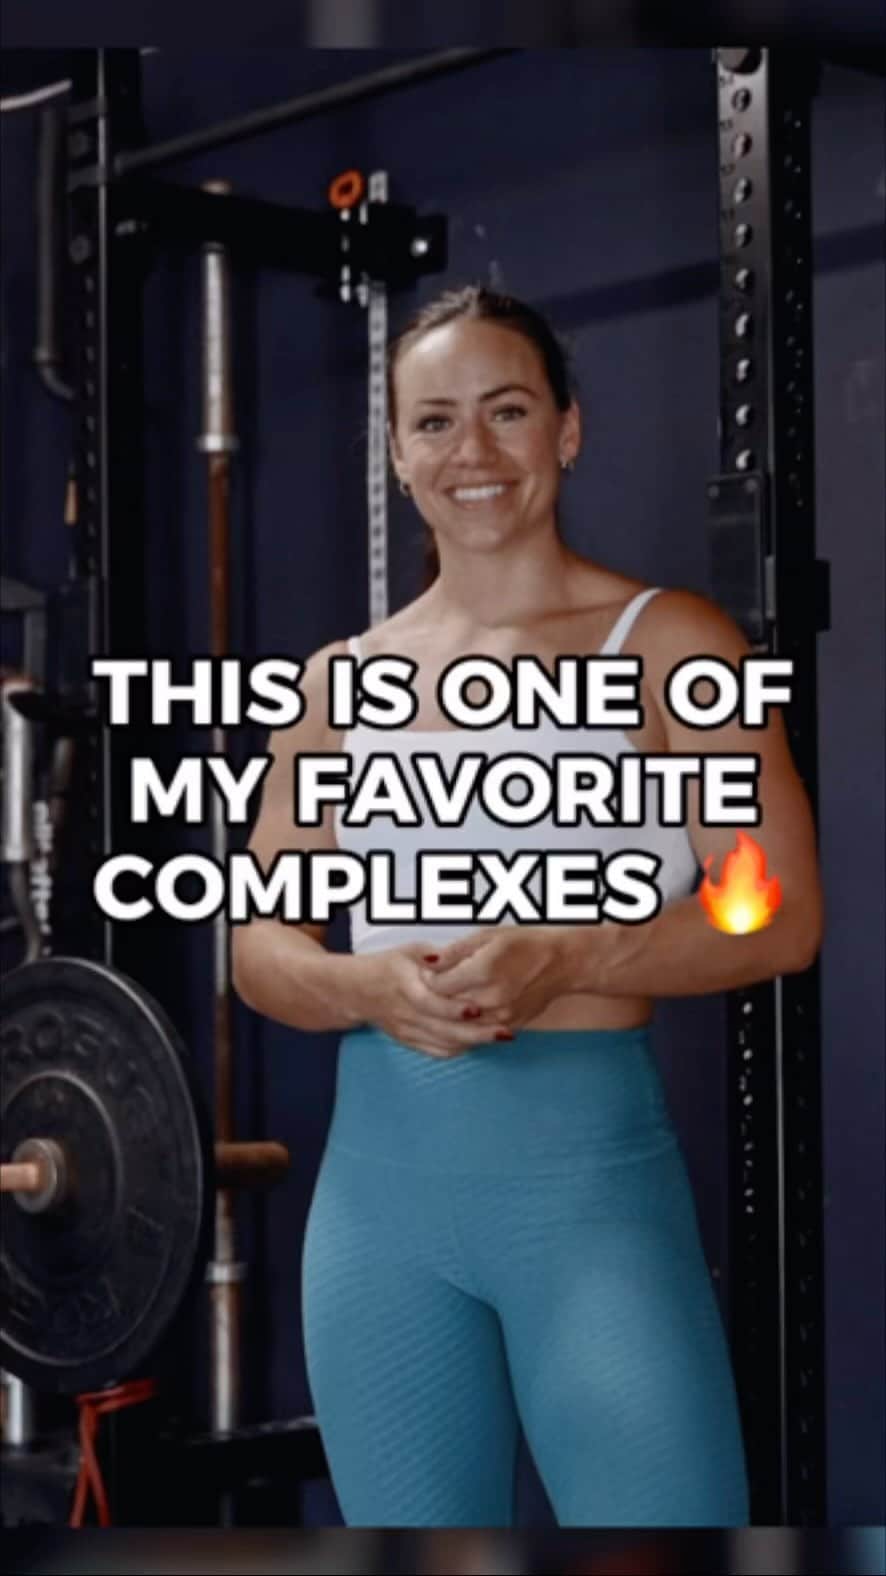 Camille Leblanc-Bazinetのインスタグラム：「🔥🔥HAMMIE GROWTH COMPLEX  From Coach Camille 🦄  PART A  30 Banded Hamstring Curls  Immediately into…  PART B  Stiff Leg (Romanian) Deadlifts - 10 V stance - 10 neutral - 10 sumo / wide  Rest 90 seconds between sets. Complete 3-4 sets.  Note: Start light! This is a high volume complex intended to exhaust your muscles. The weight does not need to be heavy for this to be effective. If you cannot complete these reps unbroken, reduce the load for the next set.  Each day of Feroce Fitness training includes three bodybuilding segments, just like this one, and ends with a high intensity functional fitness workout.   👉Ready to look and feel like a superhero? 🦸‍♀️🦸‍♀️🦸‍♀️ LINK IN BIO  #liftingprogram #workoutprogram #hamstrings #glutes #deadlift #fitness #bodybuilding #functionalfitness」